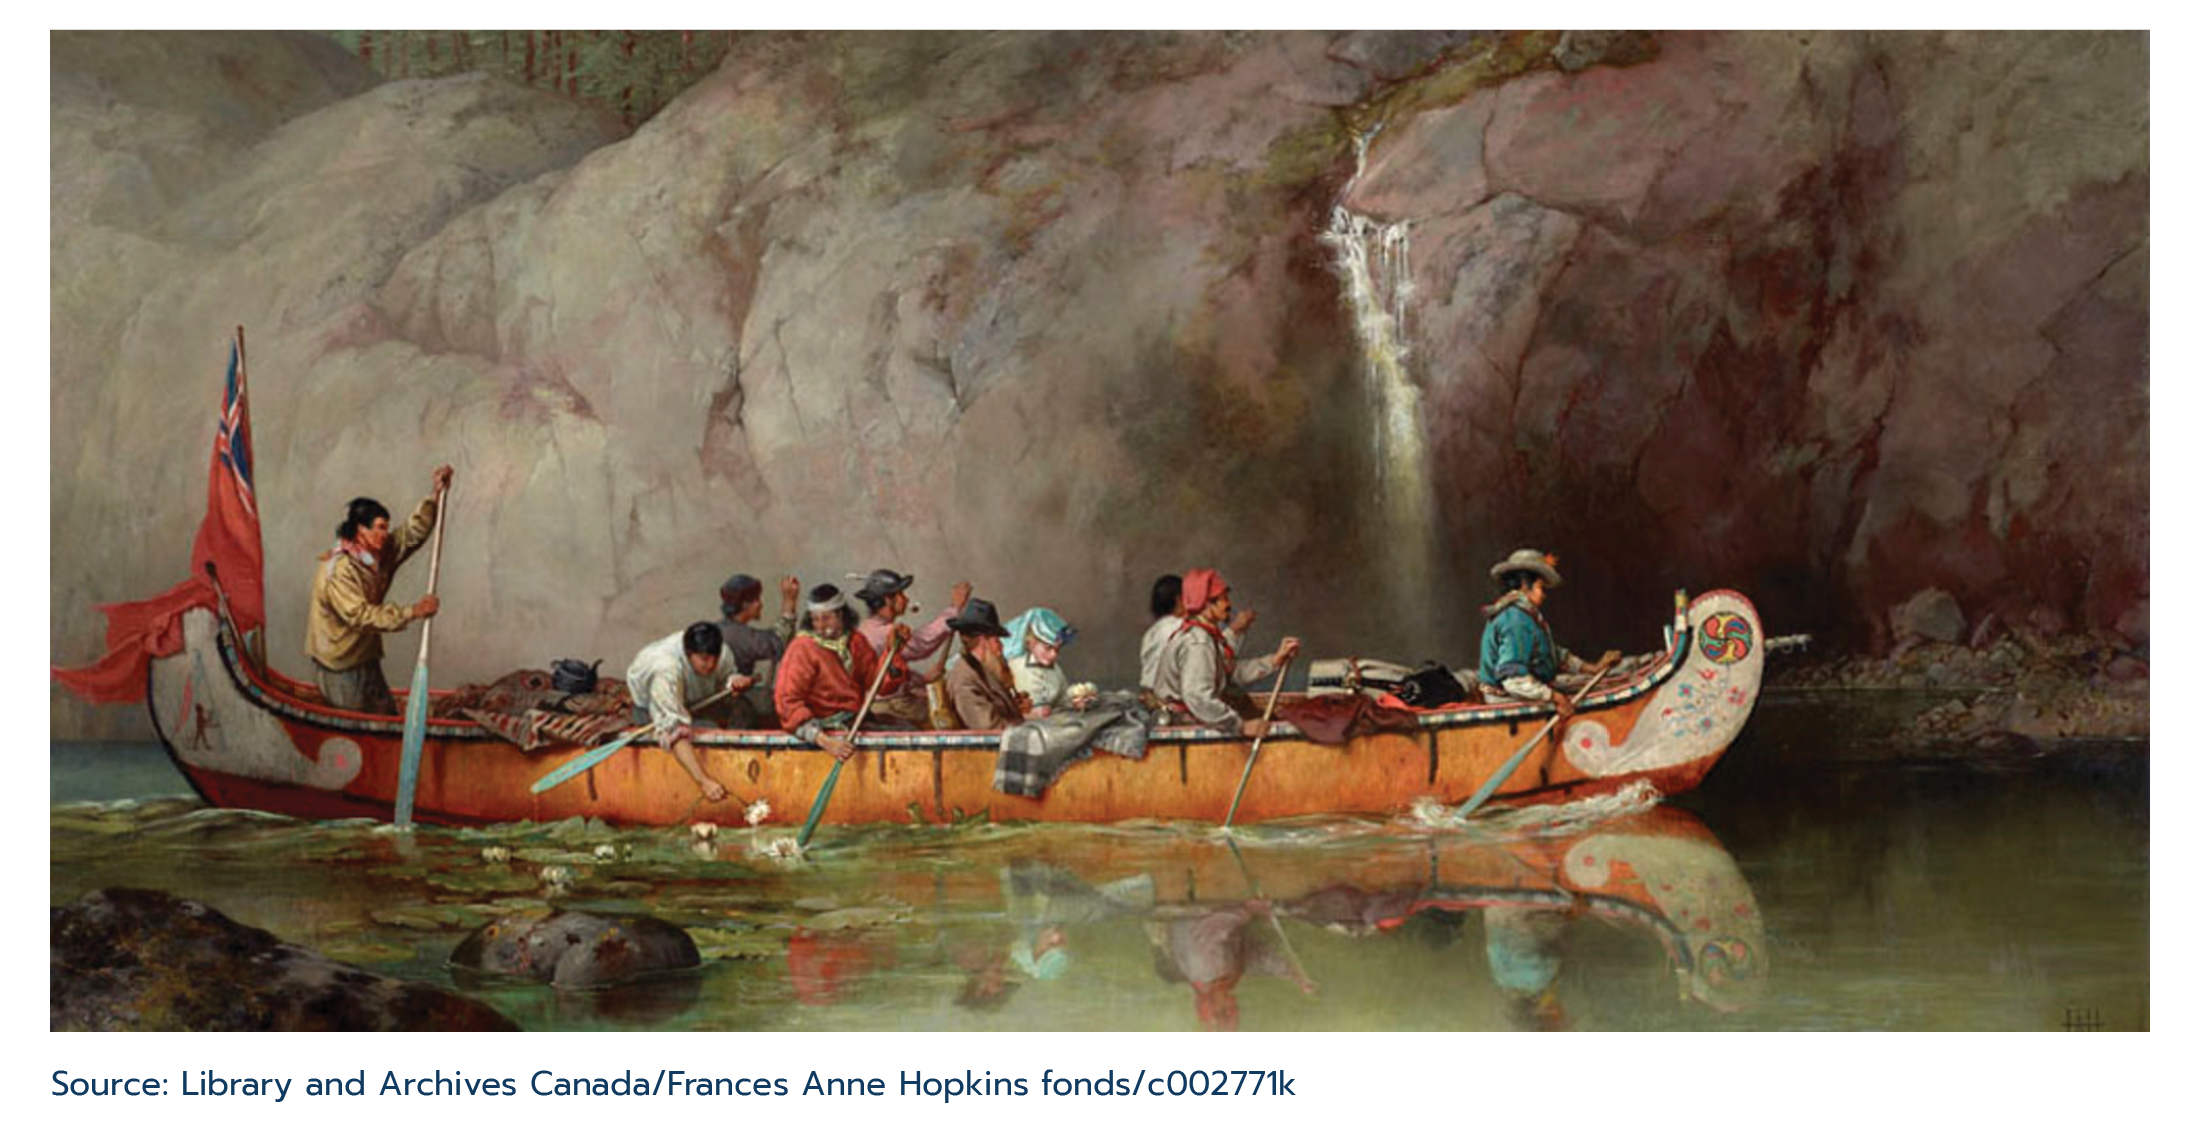 Figure 2.1: “Canoe Manned by Voyageurs Passing a Waterfall” 